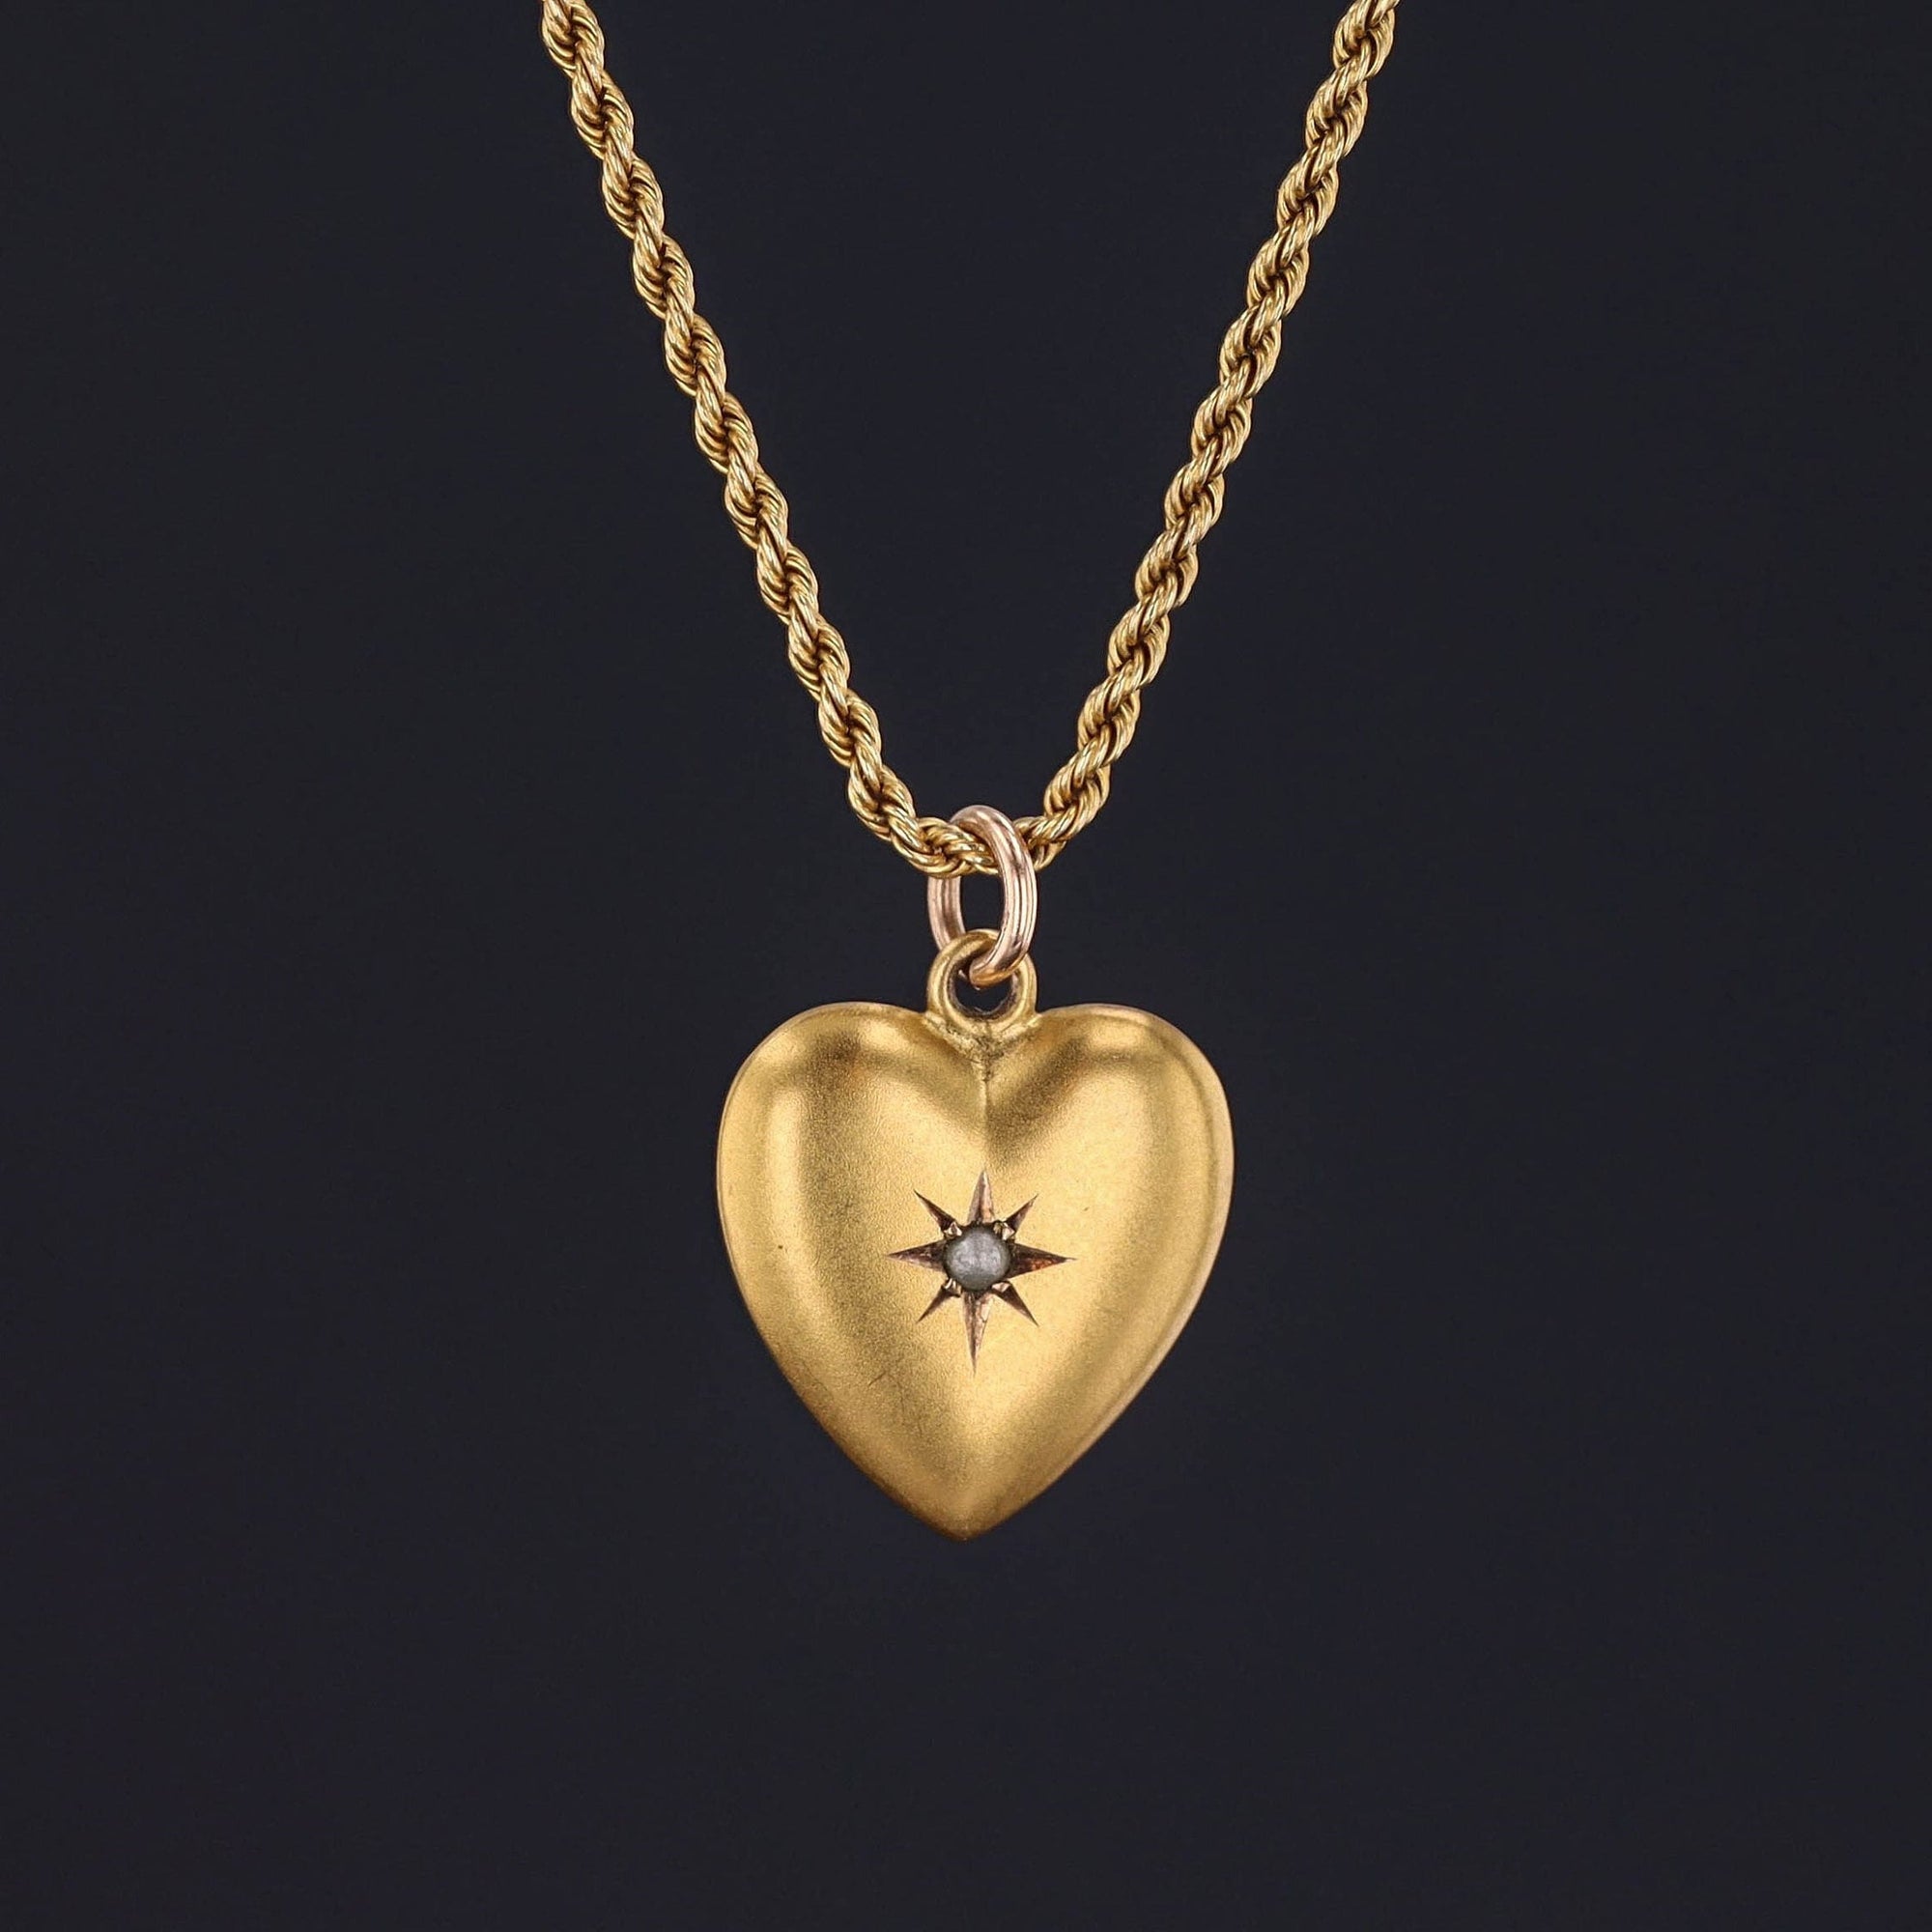 Antique Puffy Heart Charm of 14k Gold